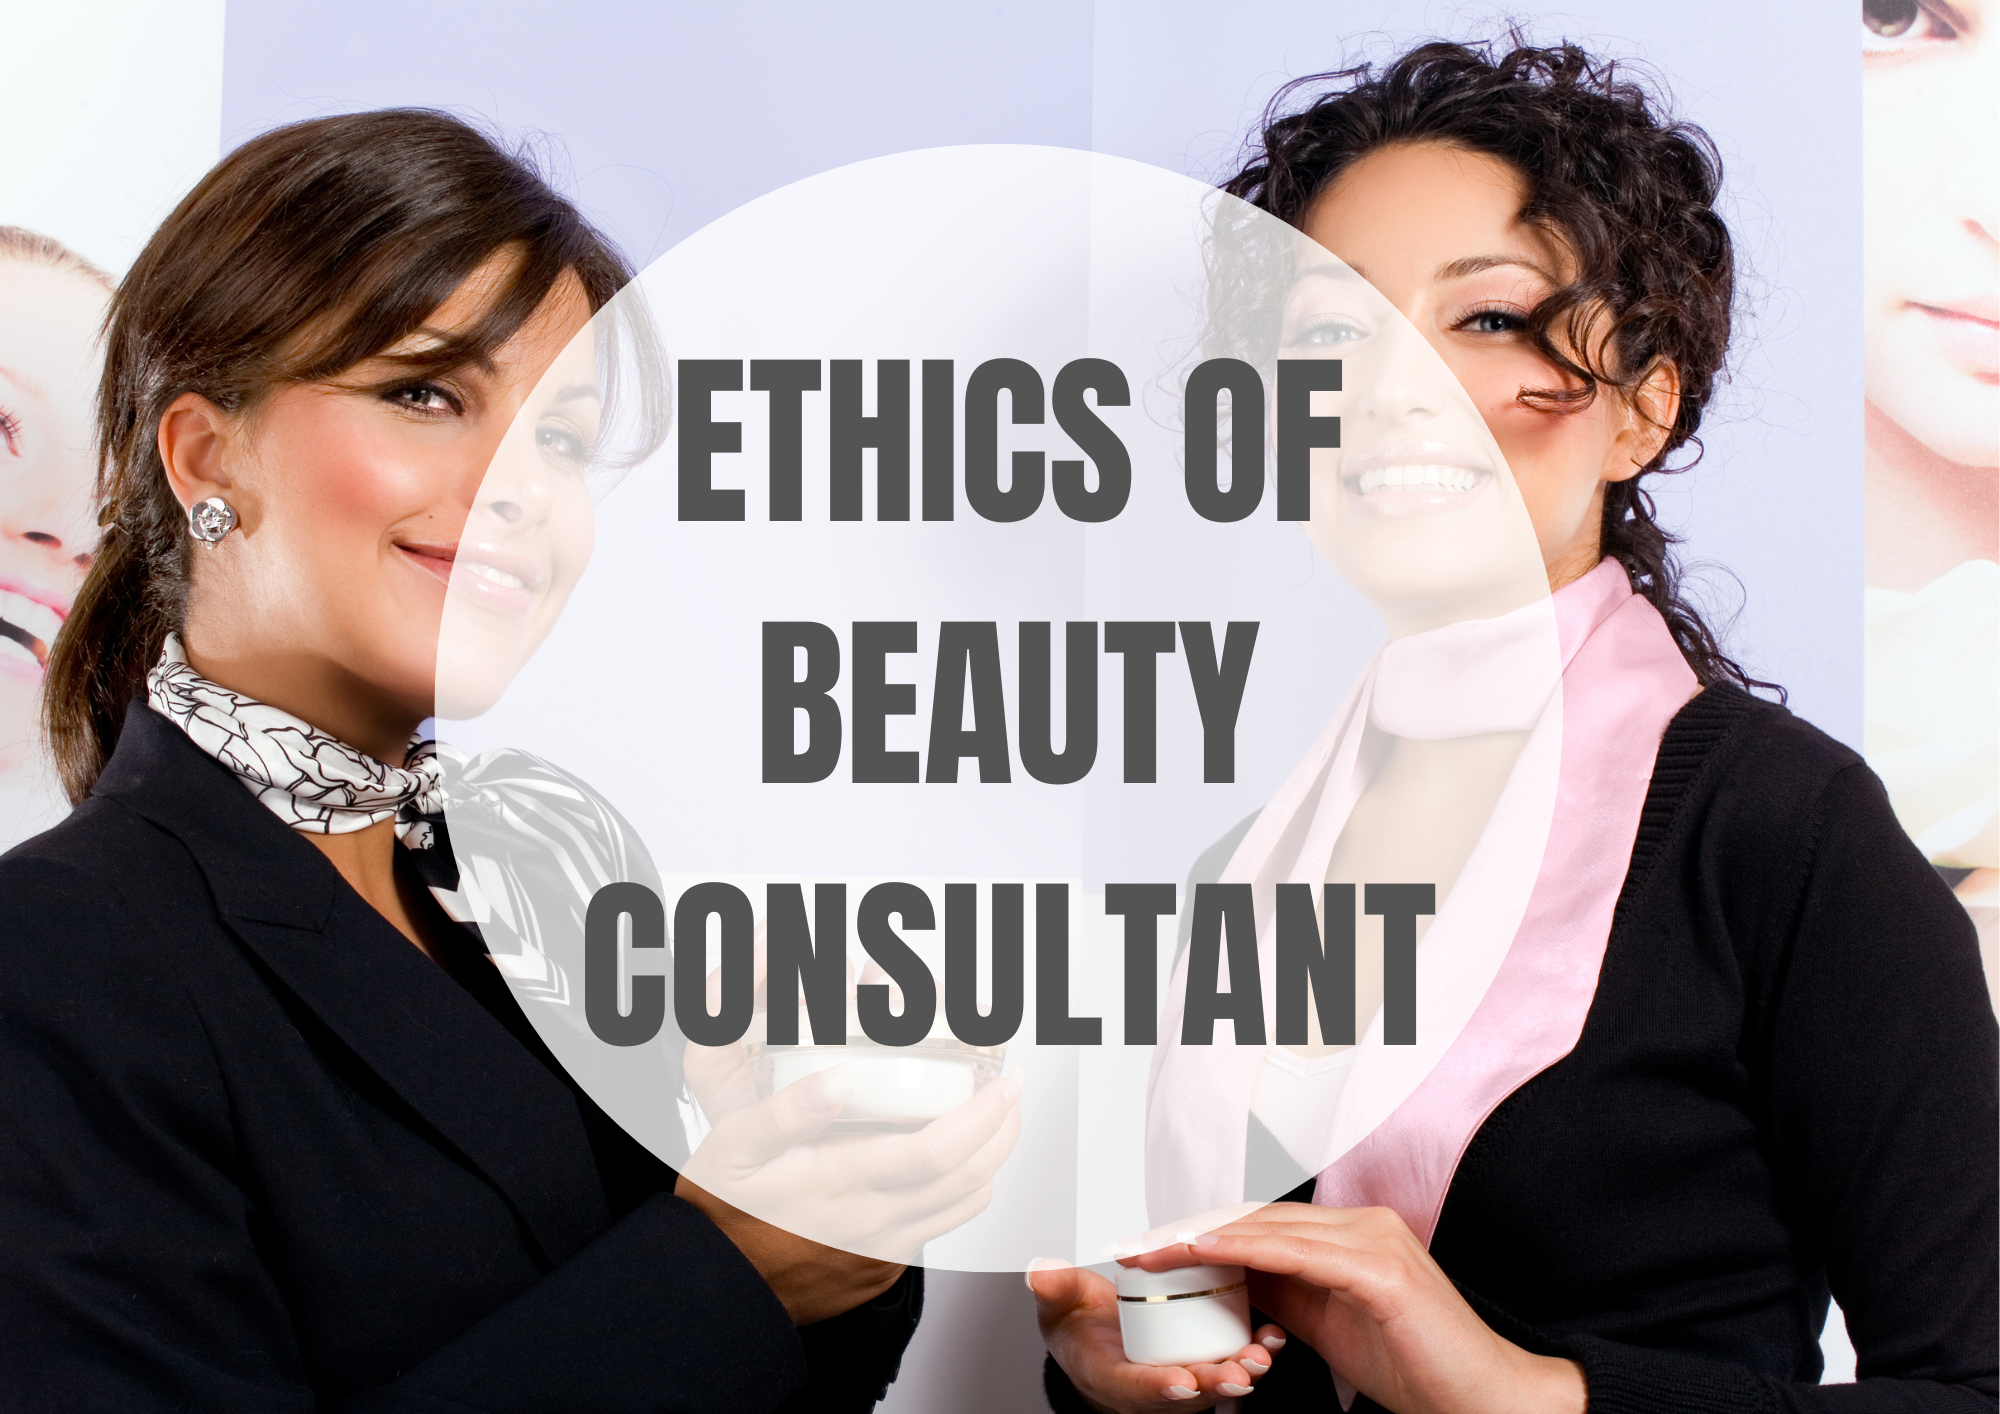 Ethics of Beauty Consultant